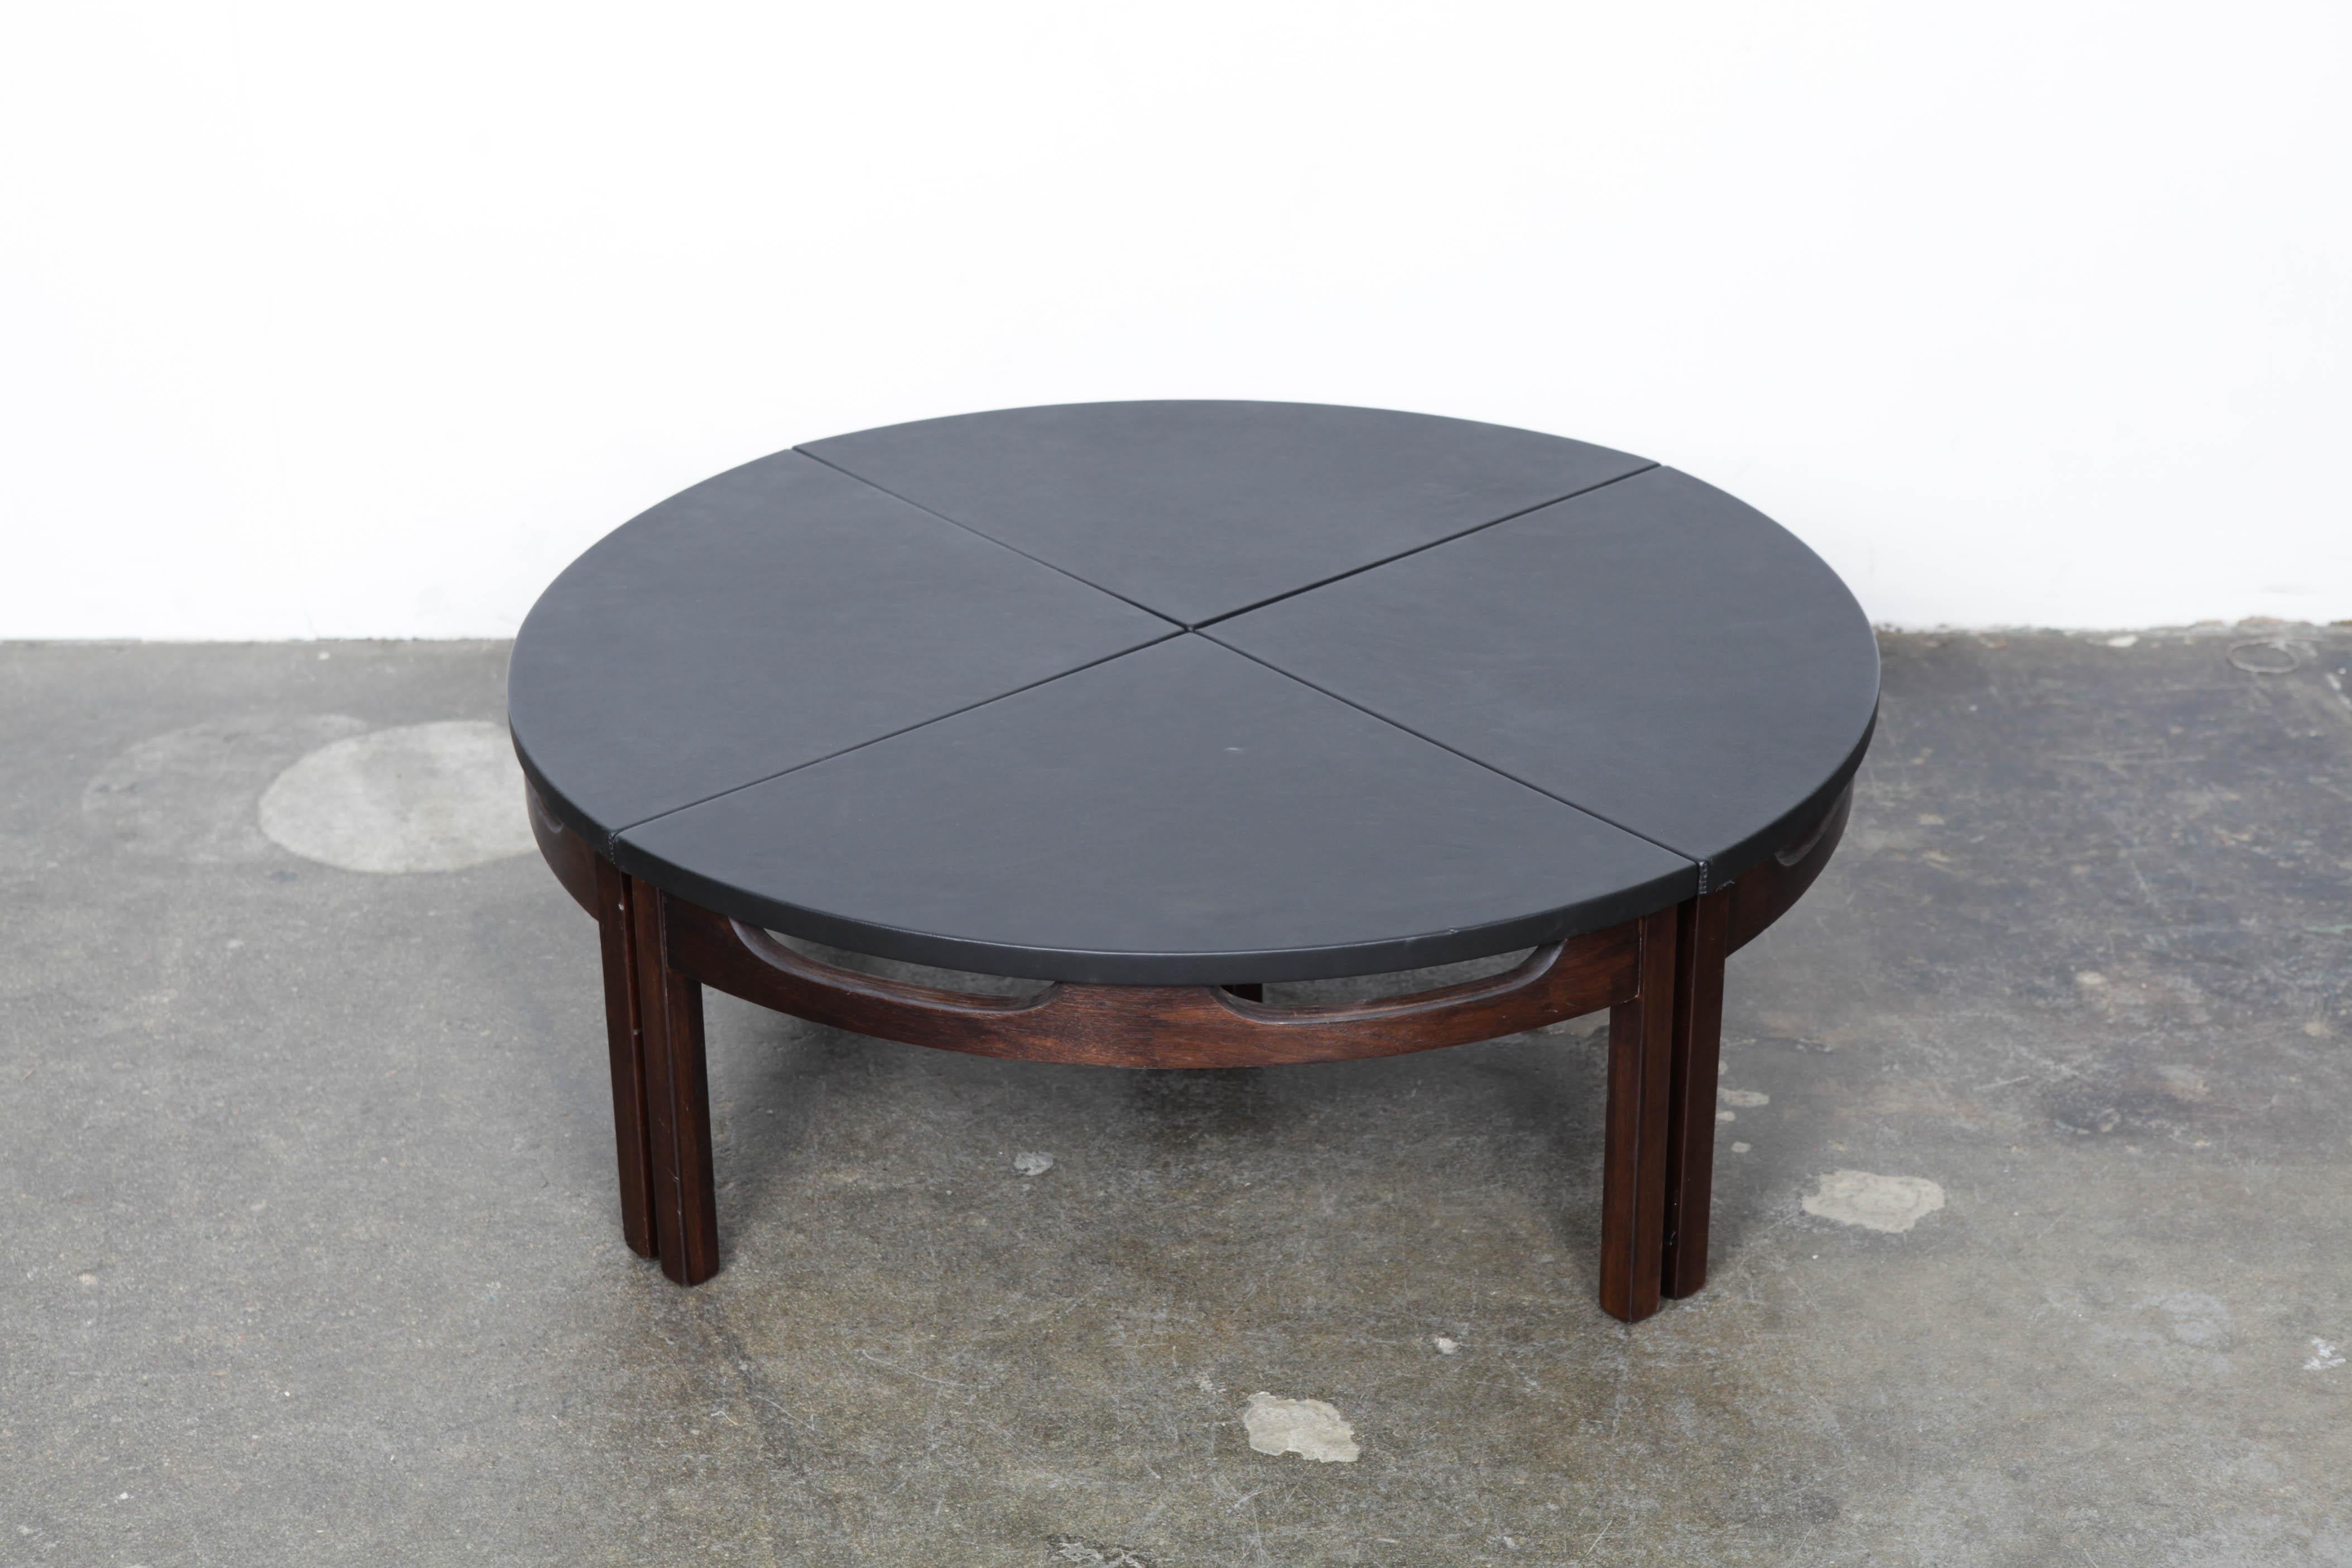 Midcentury Four-Piece Walnut and Leather Coffee Table USA, 1960s (amerikanisch)